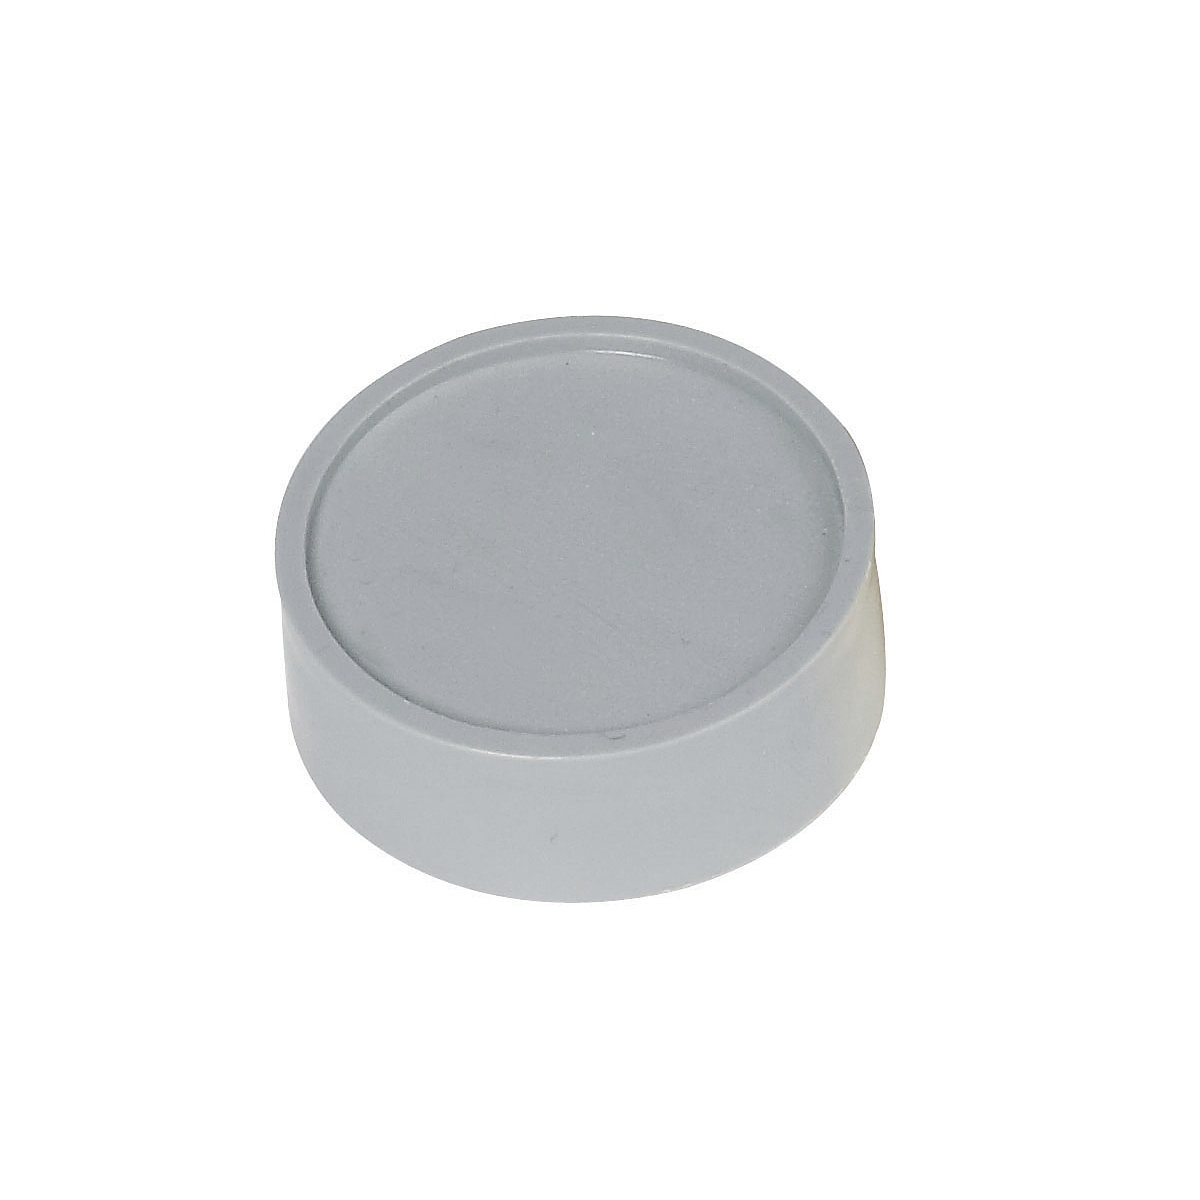 Round magnets – MAUL, Ø 34 mm, pack of 50, grey-5